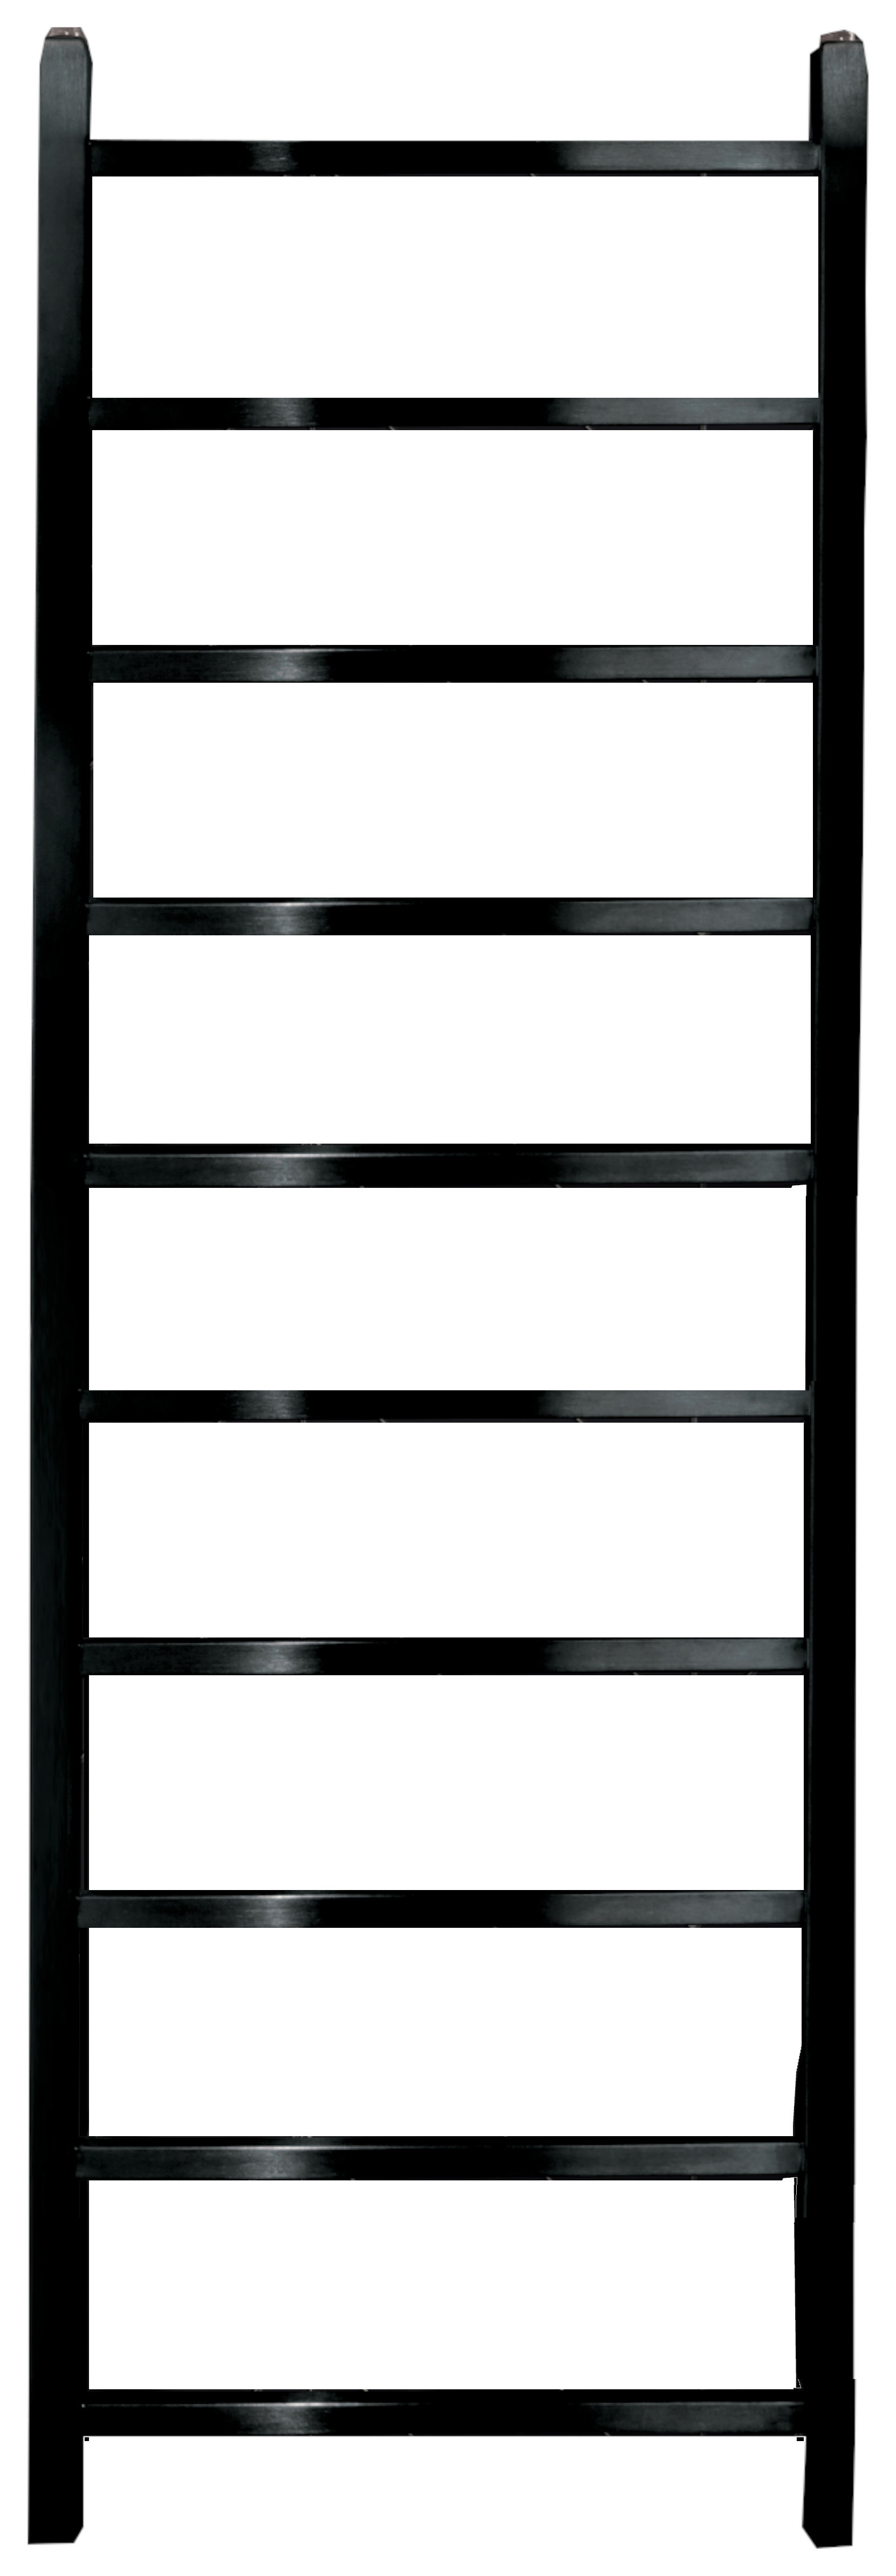 Image of Towelrads Diva Brushed Black Chrome Dry Electric Non Thermostatic Towel Radiator - 1500 x 500mm